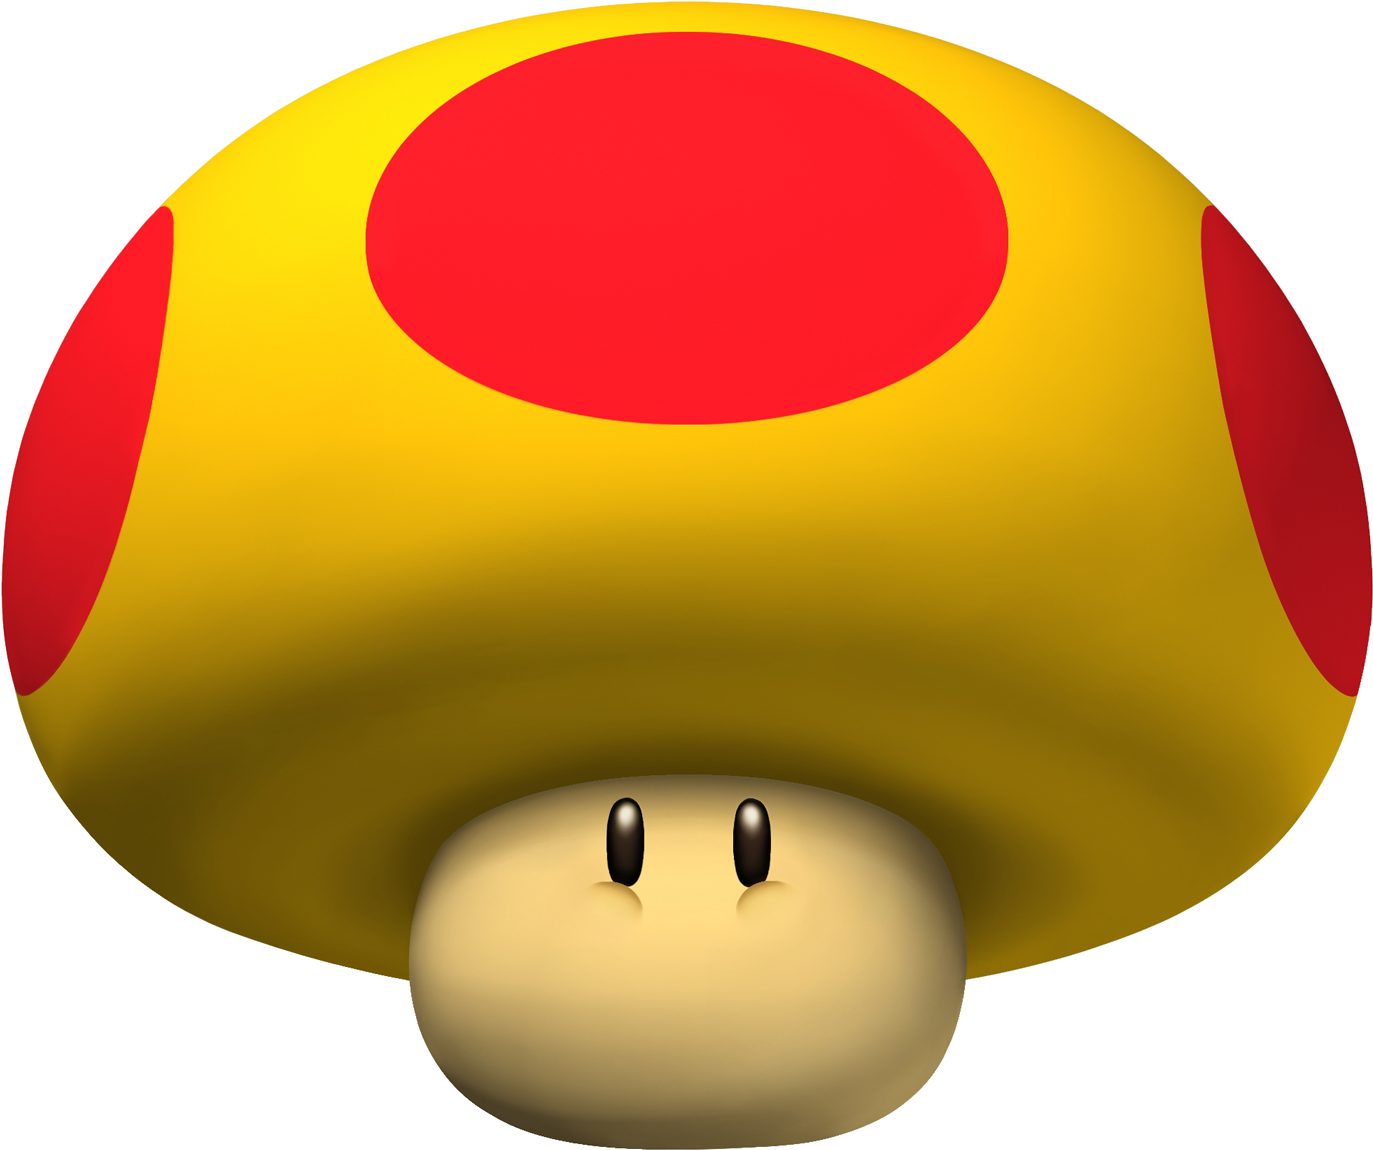 A Cartoon Mushroom With Red Dots PNG